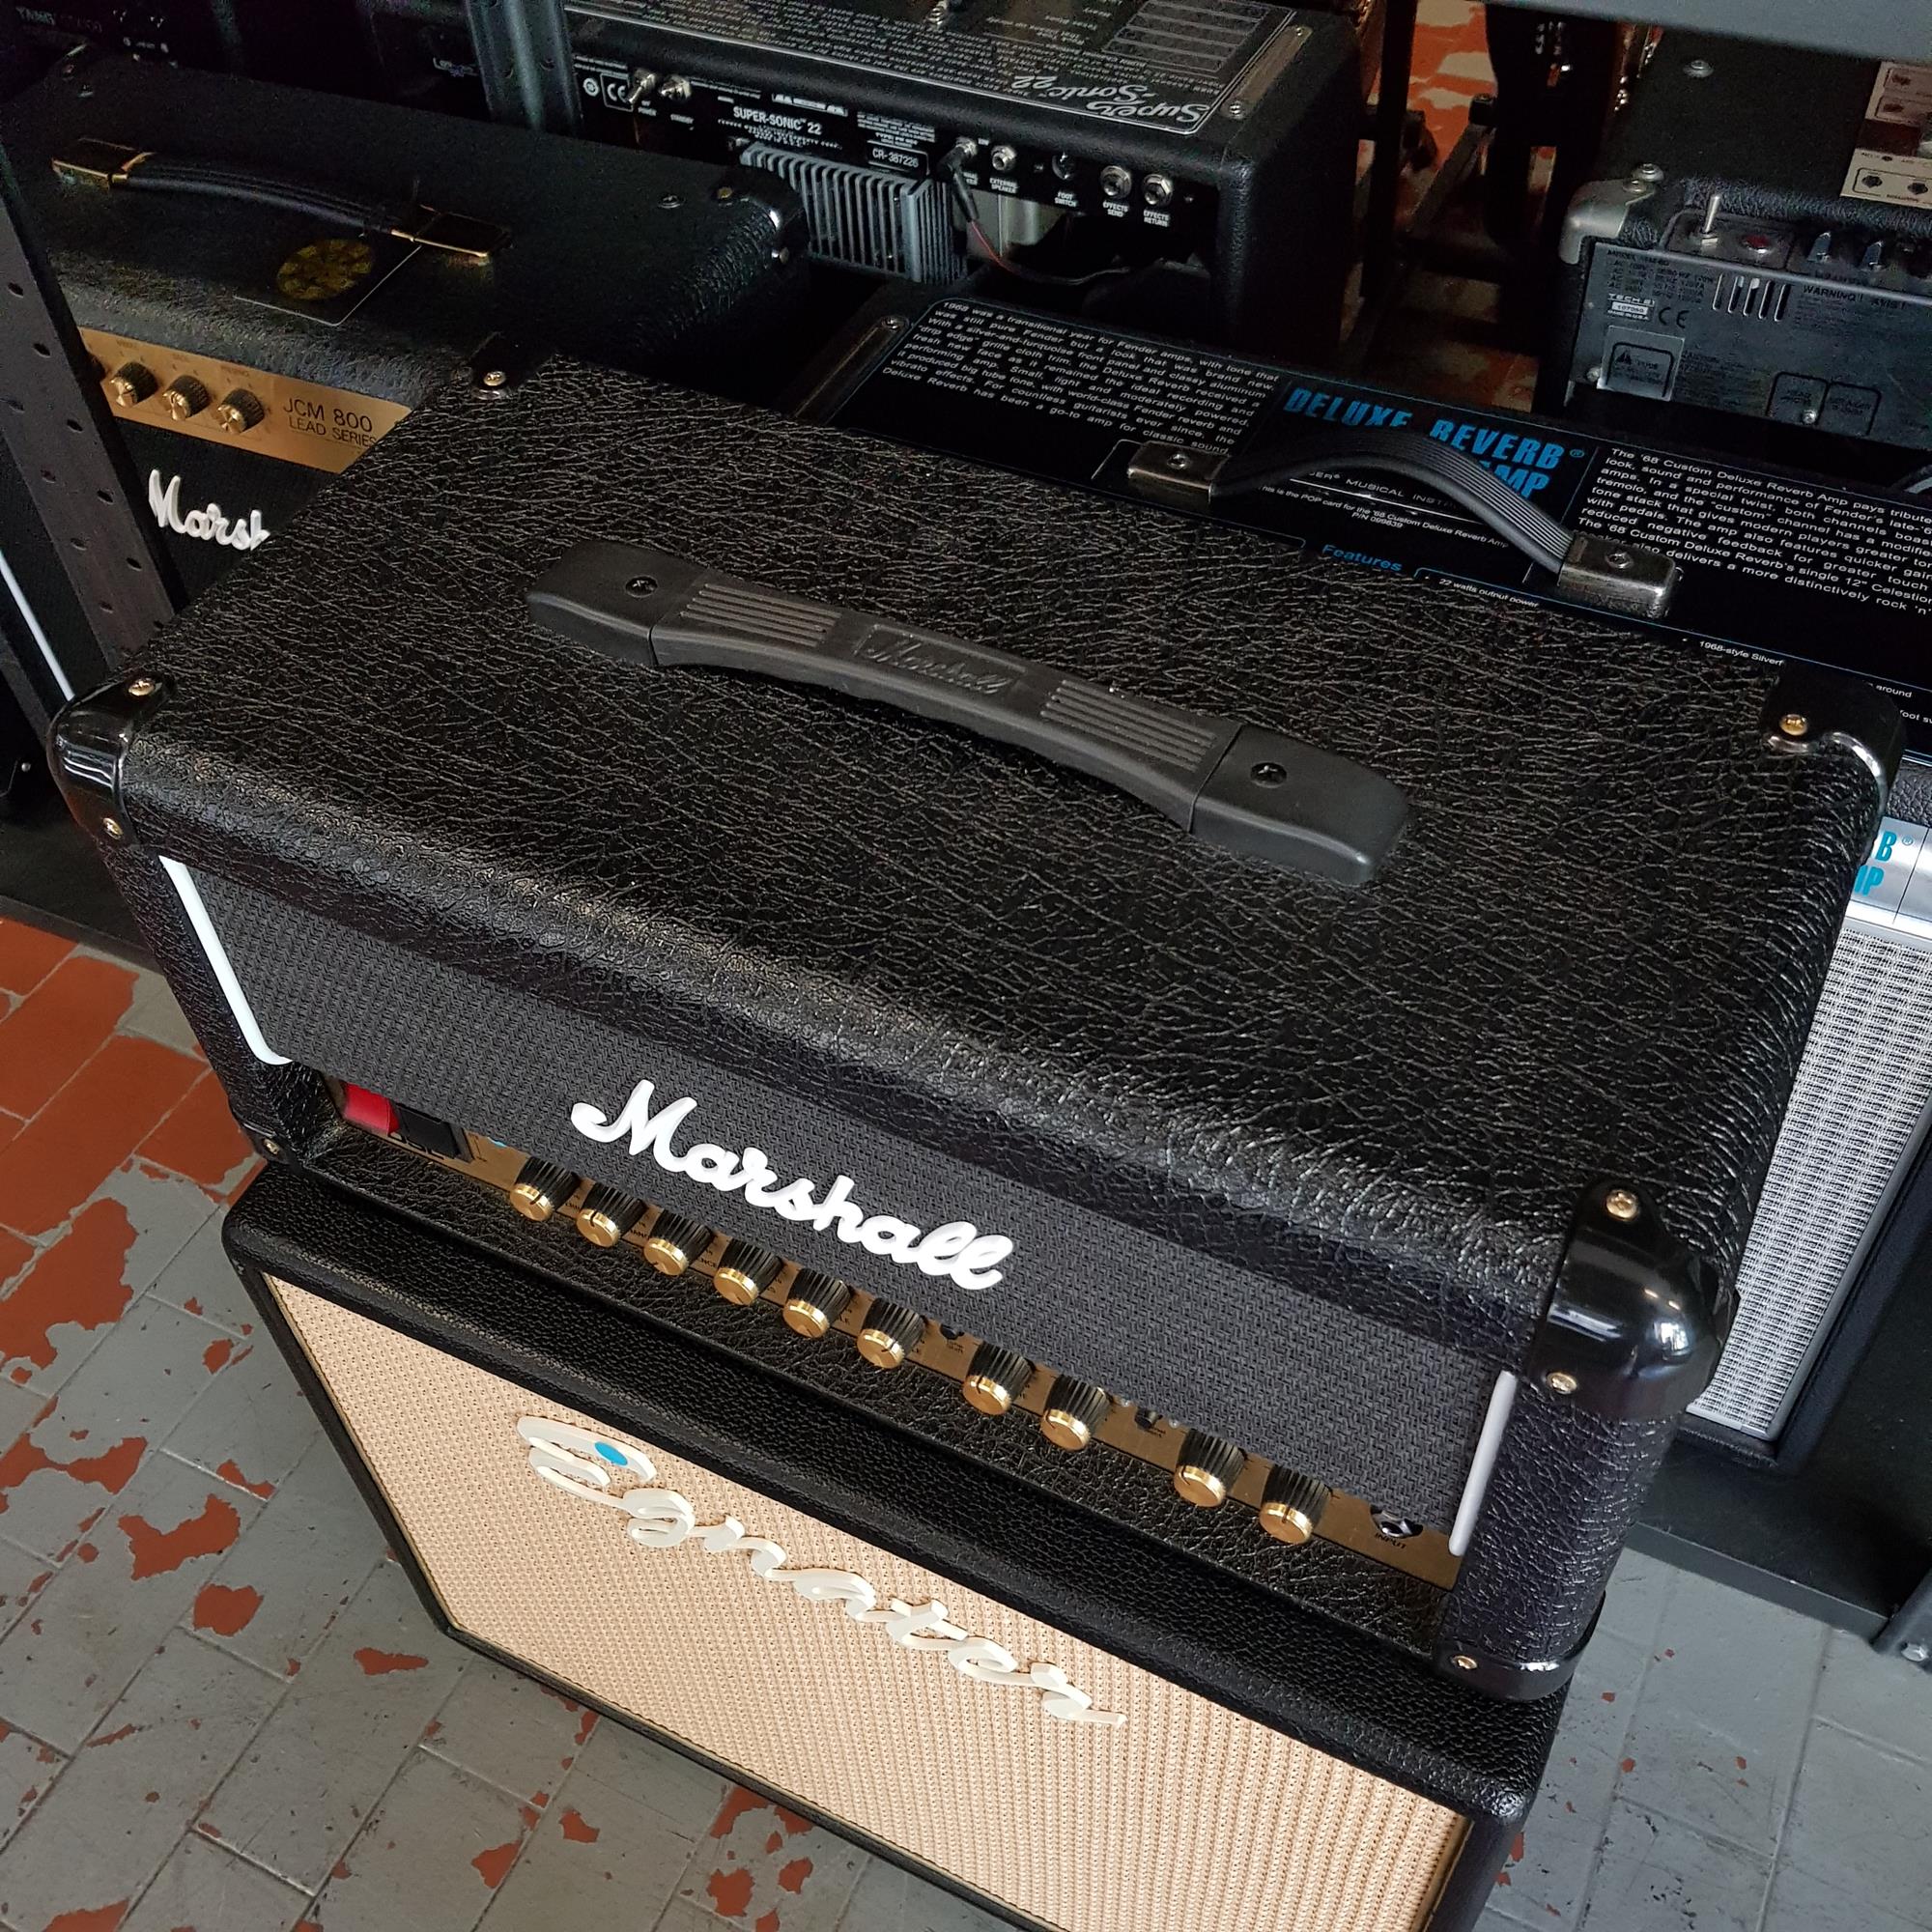 MARSHALL DSL 20 HEAD + FOOTSWITCH